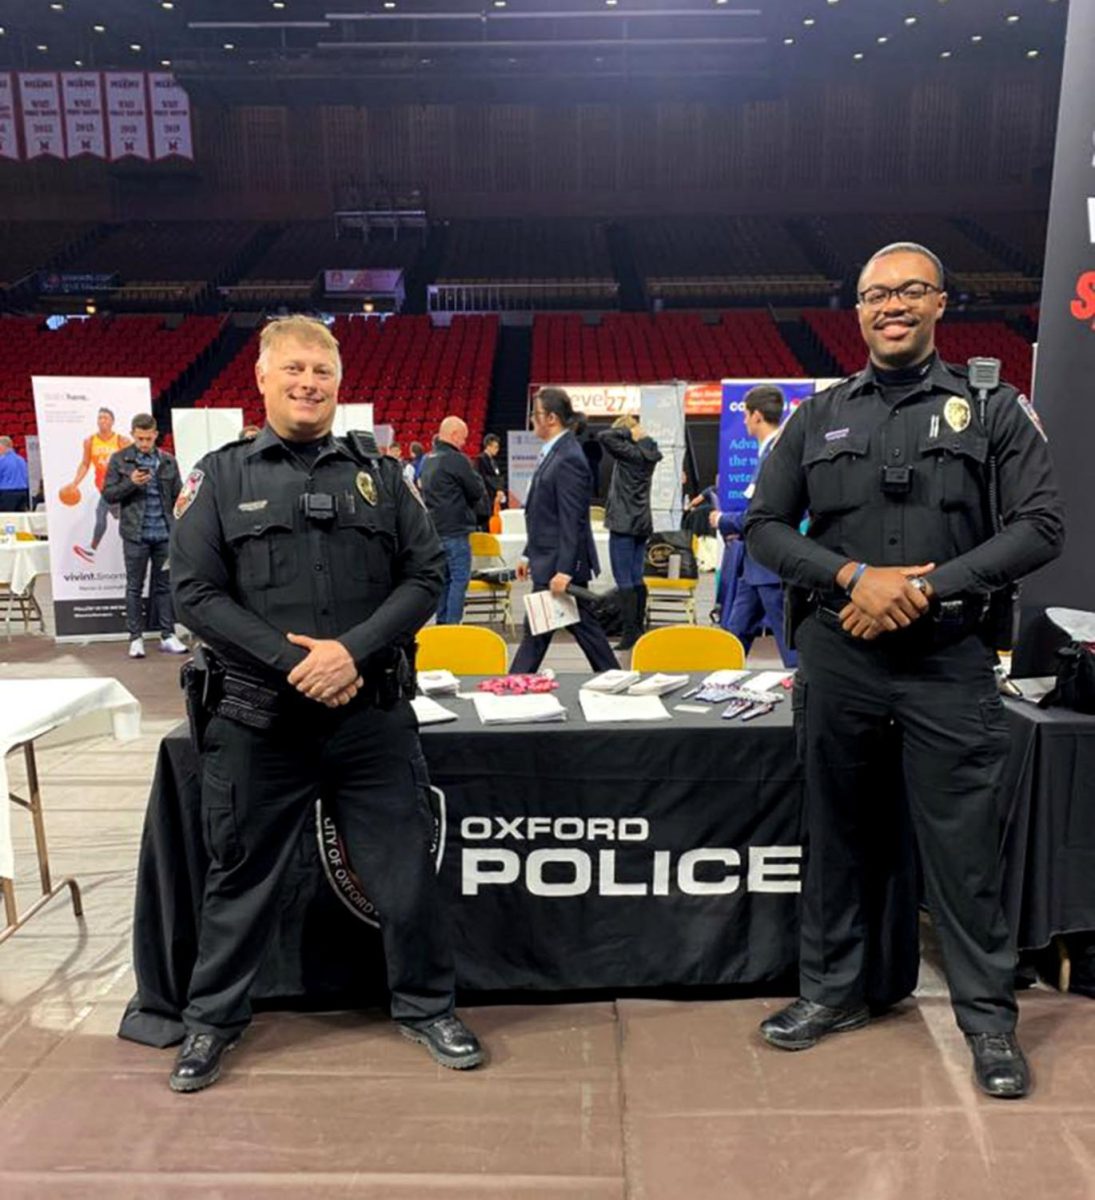 Officers Pete Durkin and Anthony Jones worked the Oxford Police Department table at Miami’s Spring Career and Internship Fair on Wednesday in Millett Hall. The police department was one of a handful of local employers among the 250 at the fair. OPD has two open positions for police officers at the moment according to its Facebook page. Photo by the Oxford Police Department. 